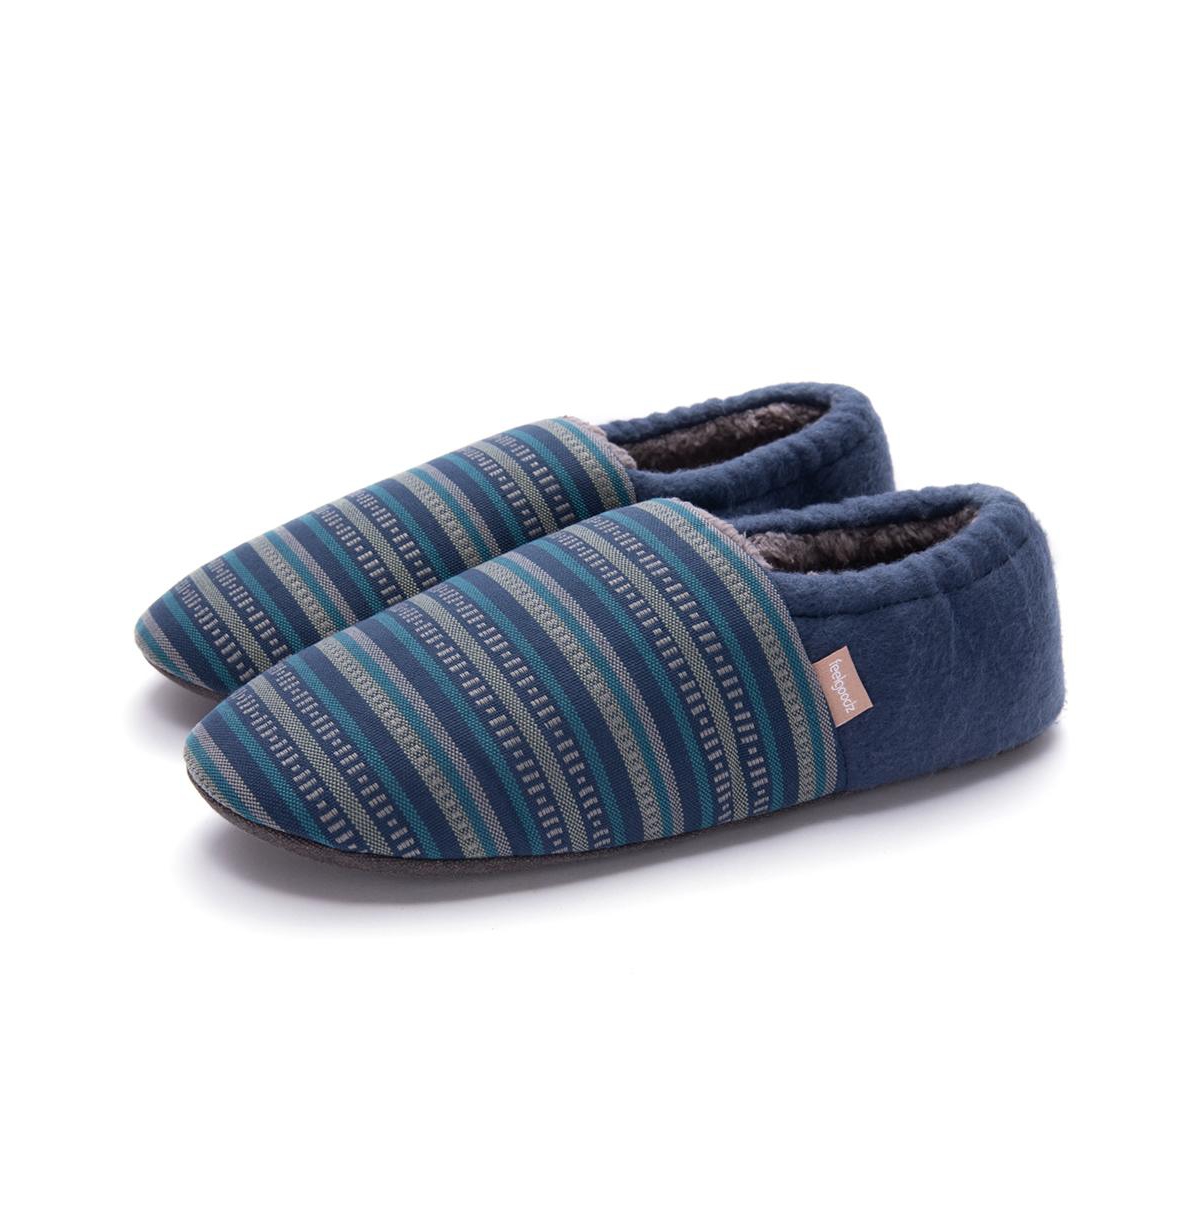 Men's Laidback Slipper Artisan Woven Indoor Closed Heel House Shoes - Spruce